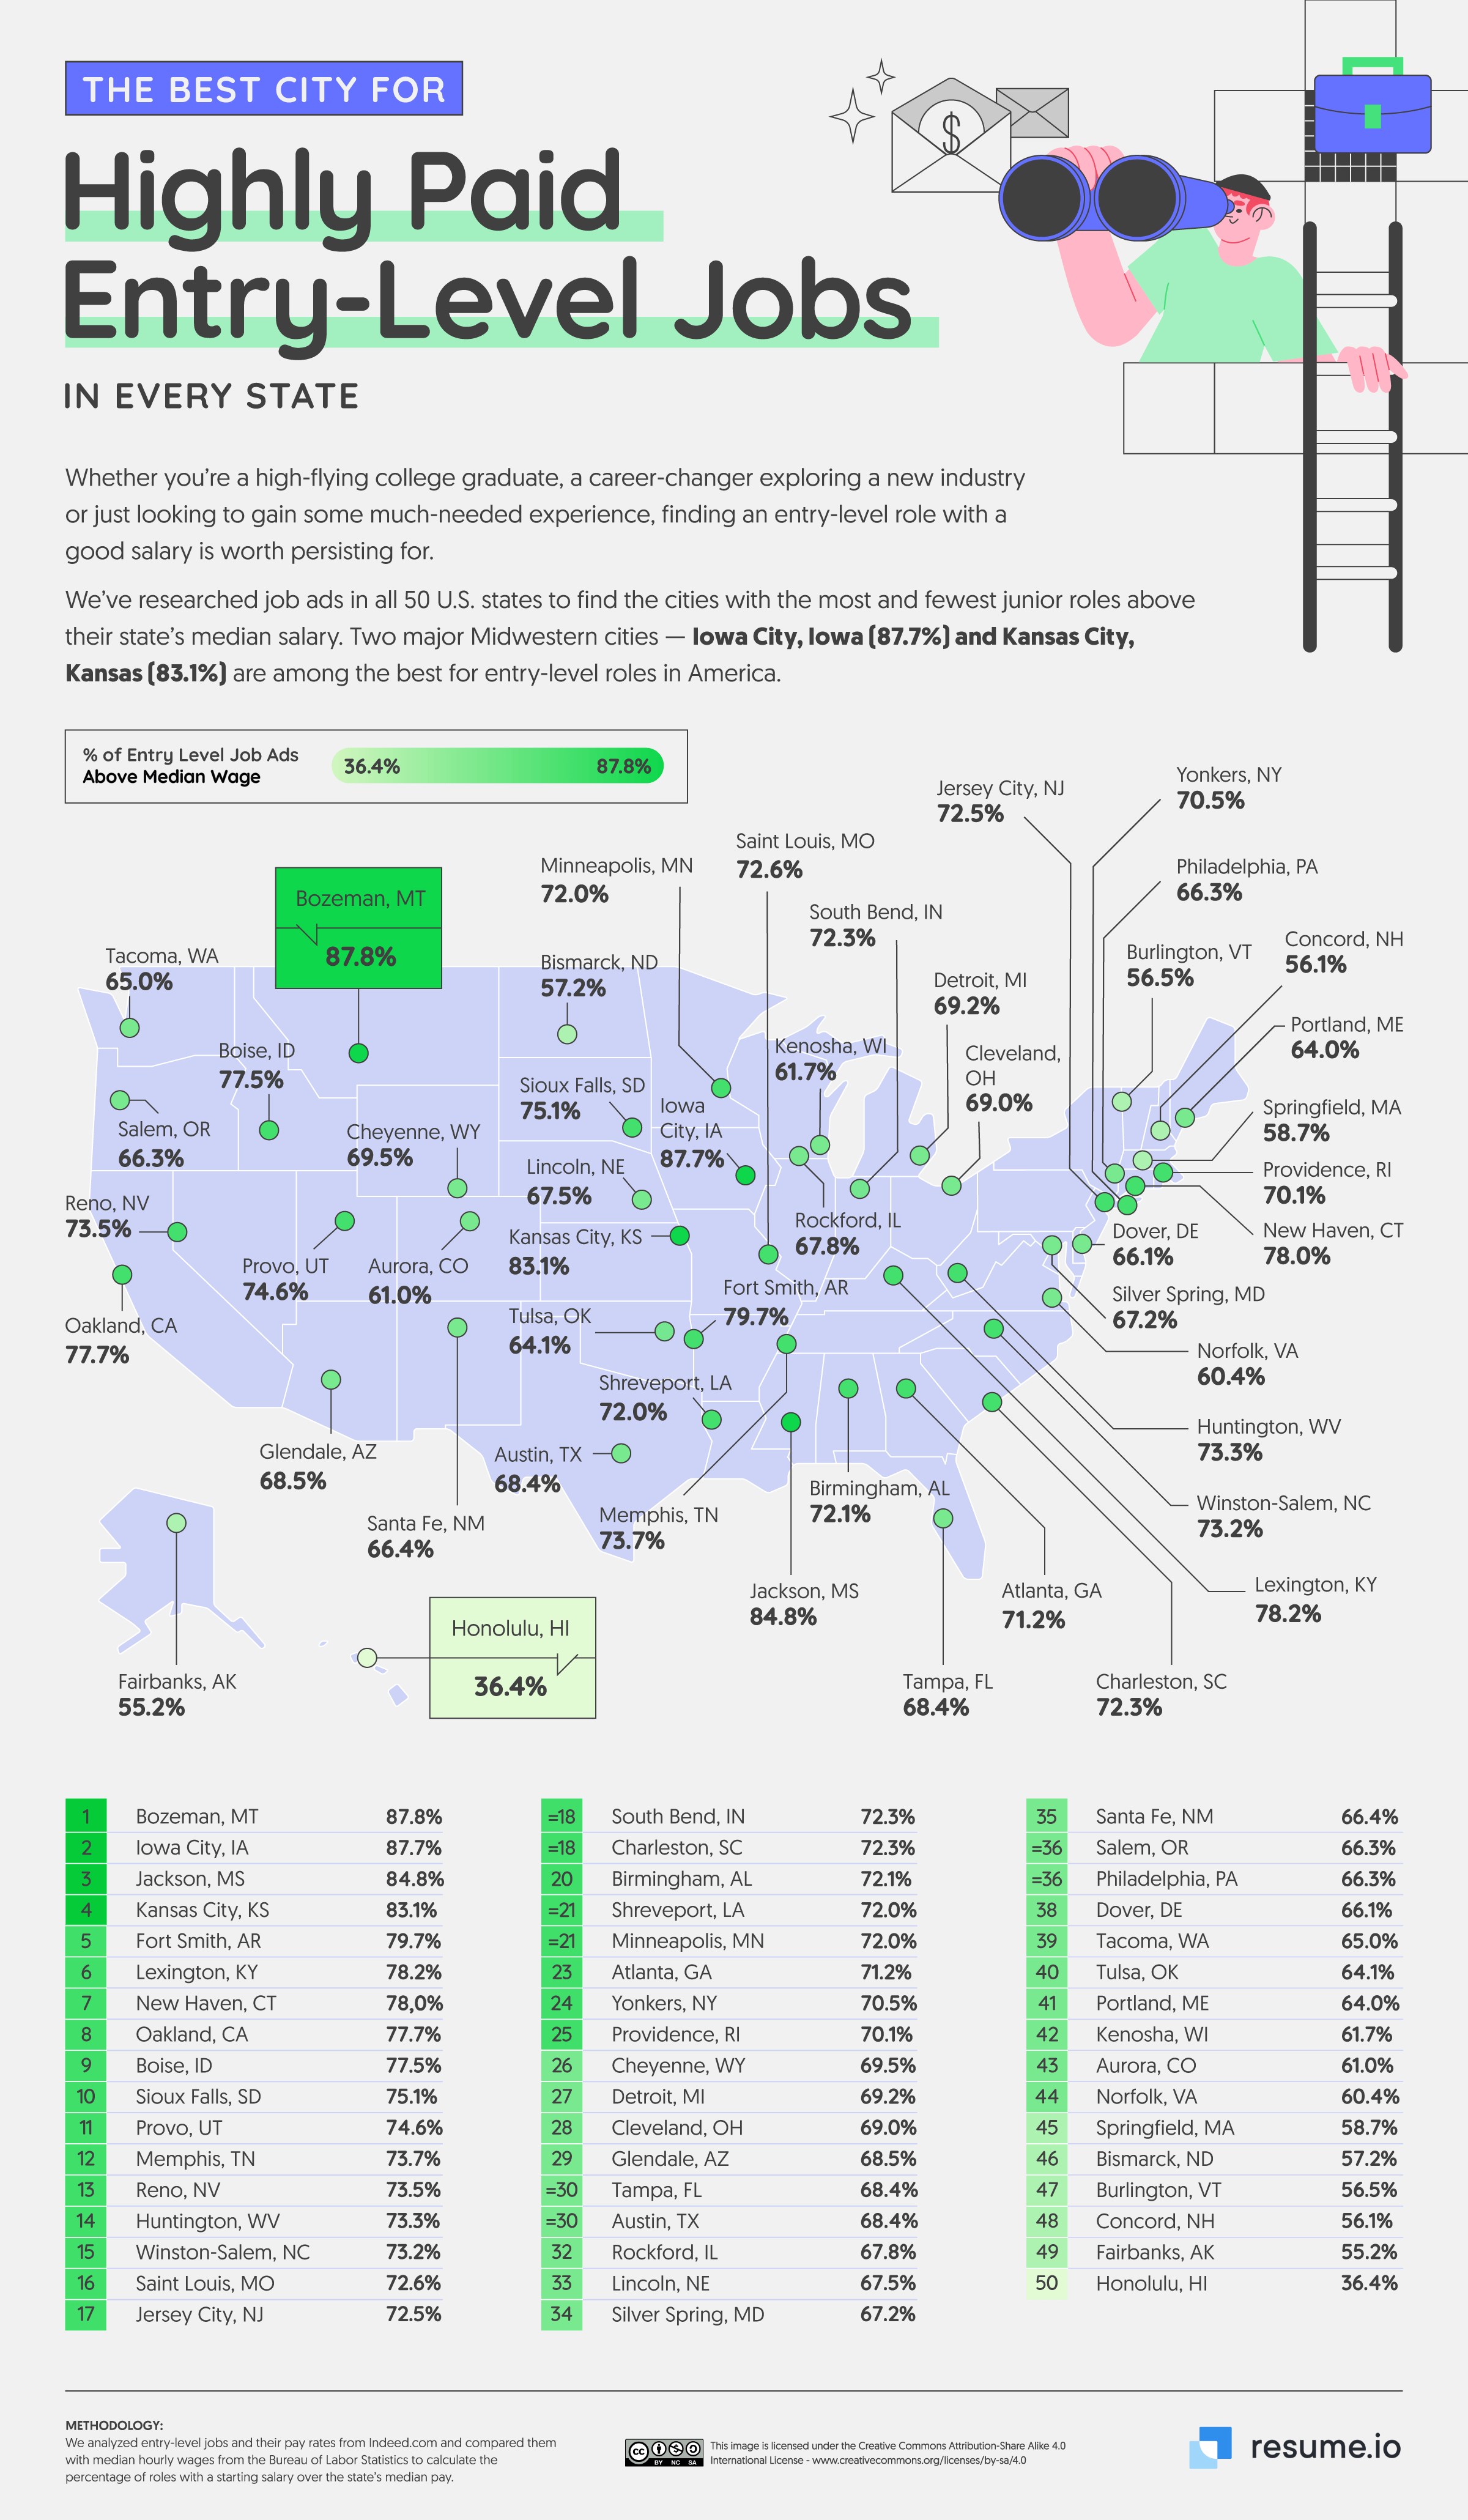 04_Best-City-for-Highly-Paid-Entry-Level-Jobs-in-Every-State